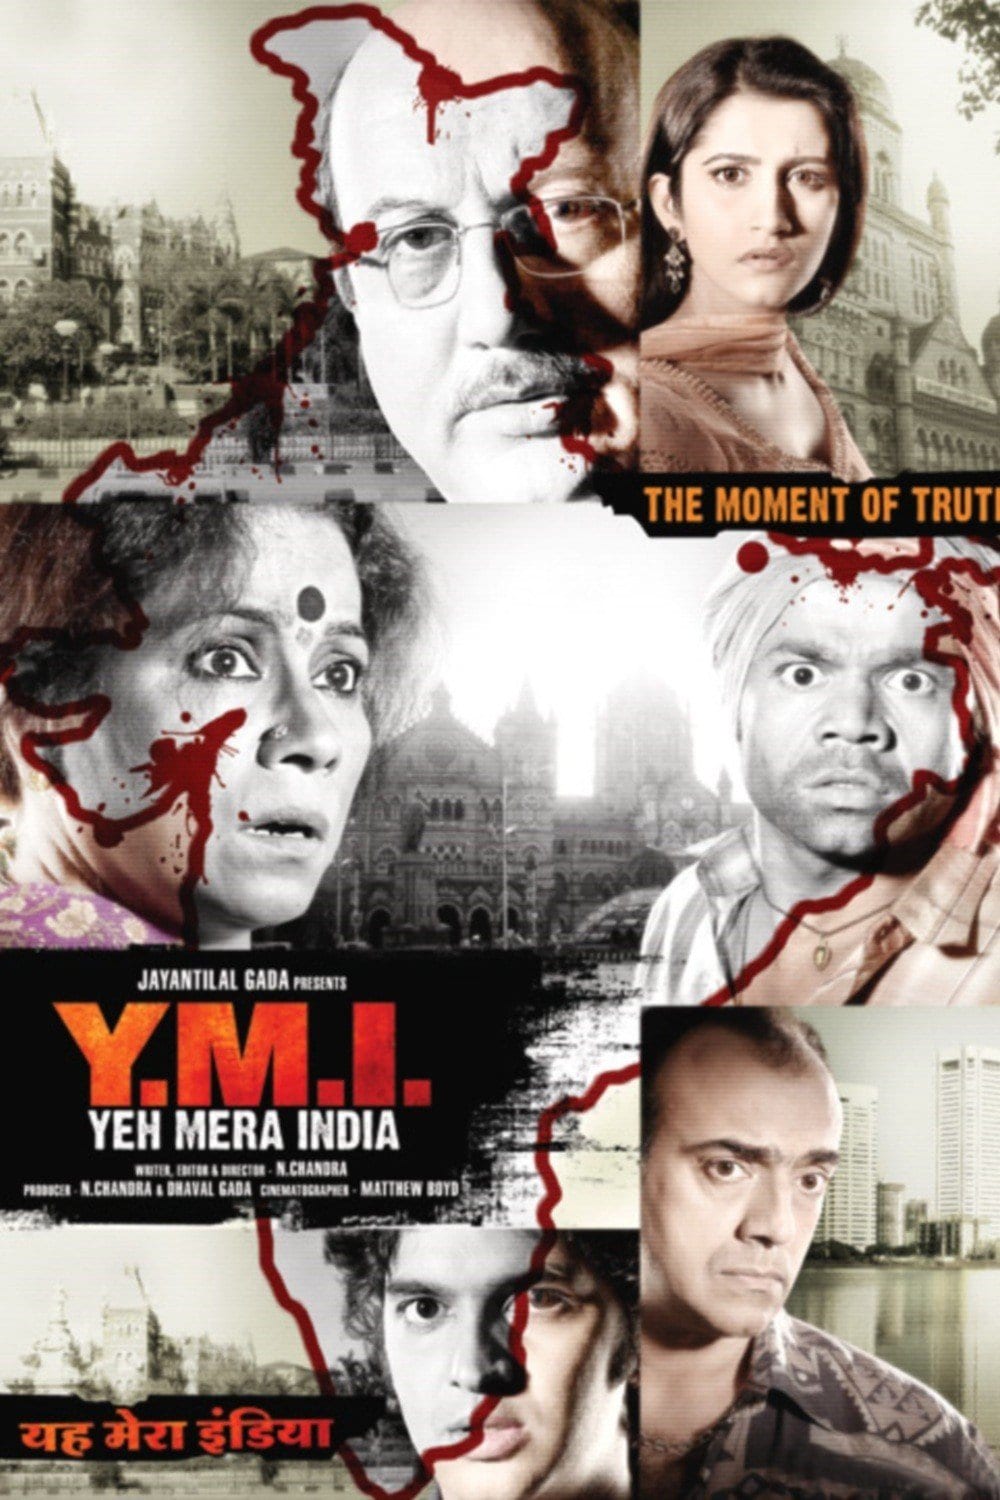 Poster for the movie "Y M I Yeh Mera India"